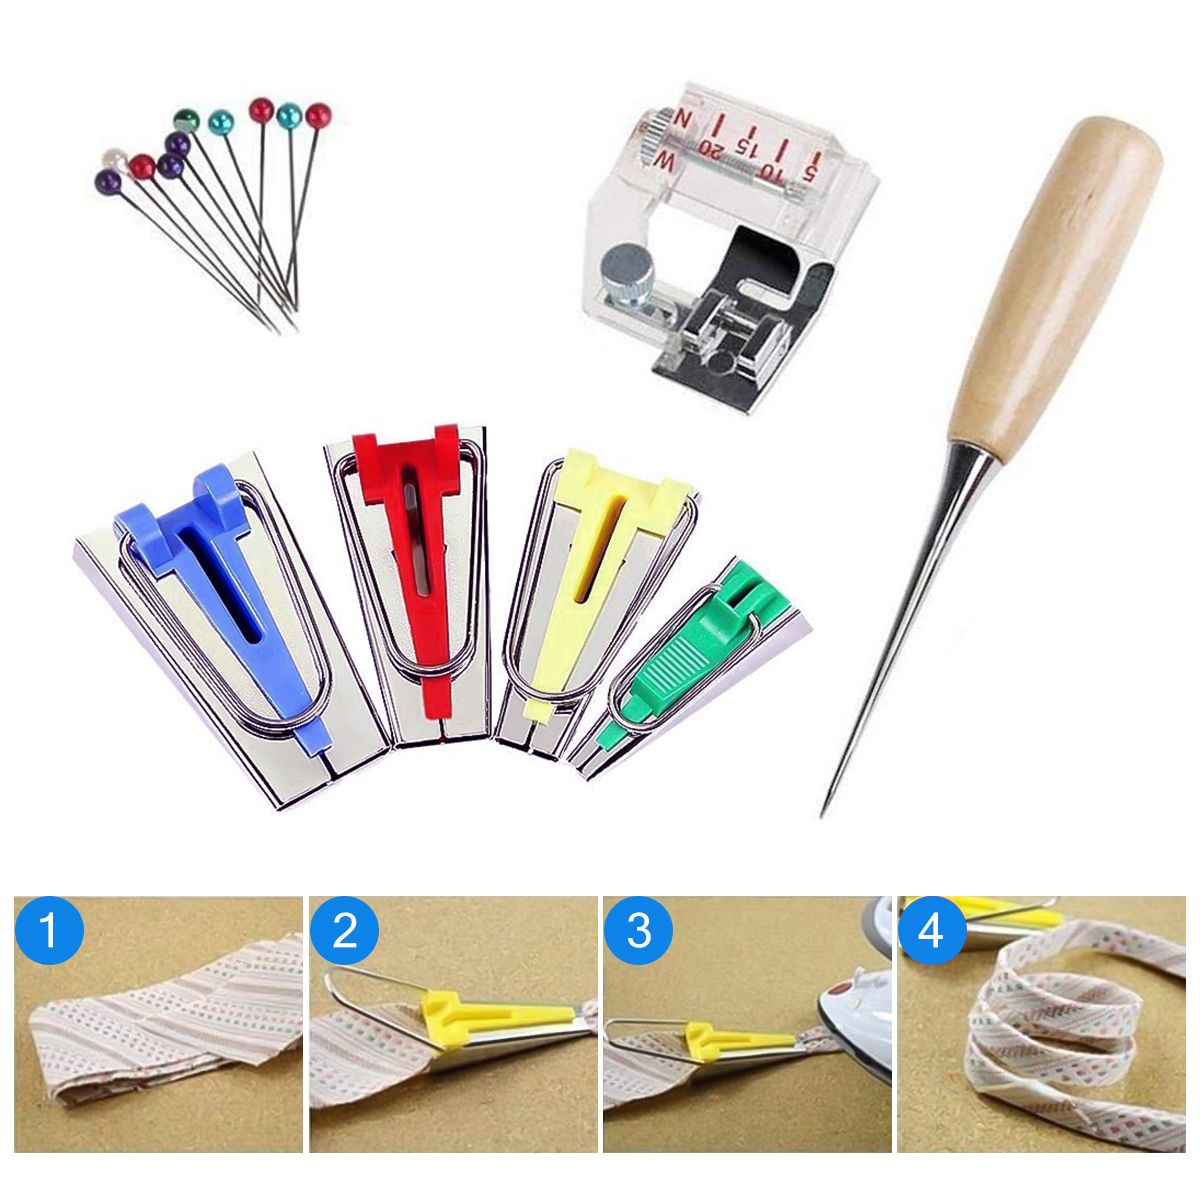 Sewing-Tape-Maker-Kits-4-Sizes-6MM-12MM-18MM-25MM-Household-DIY-Fabric-Patchwork-Sewing-Accessories--1707094